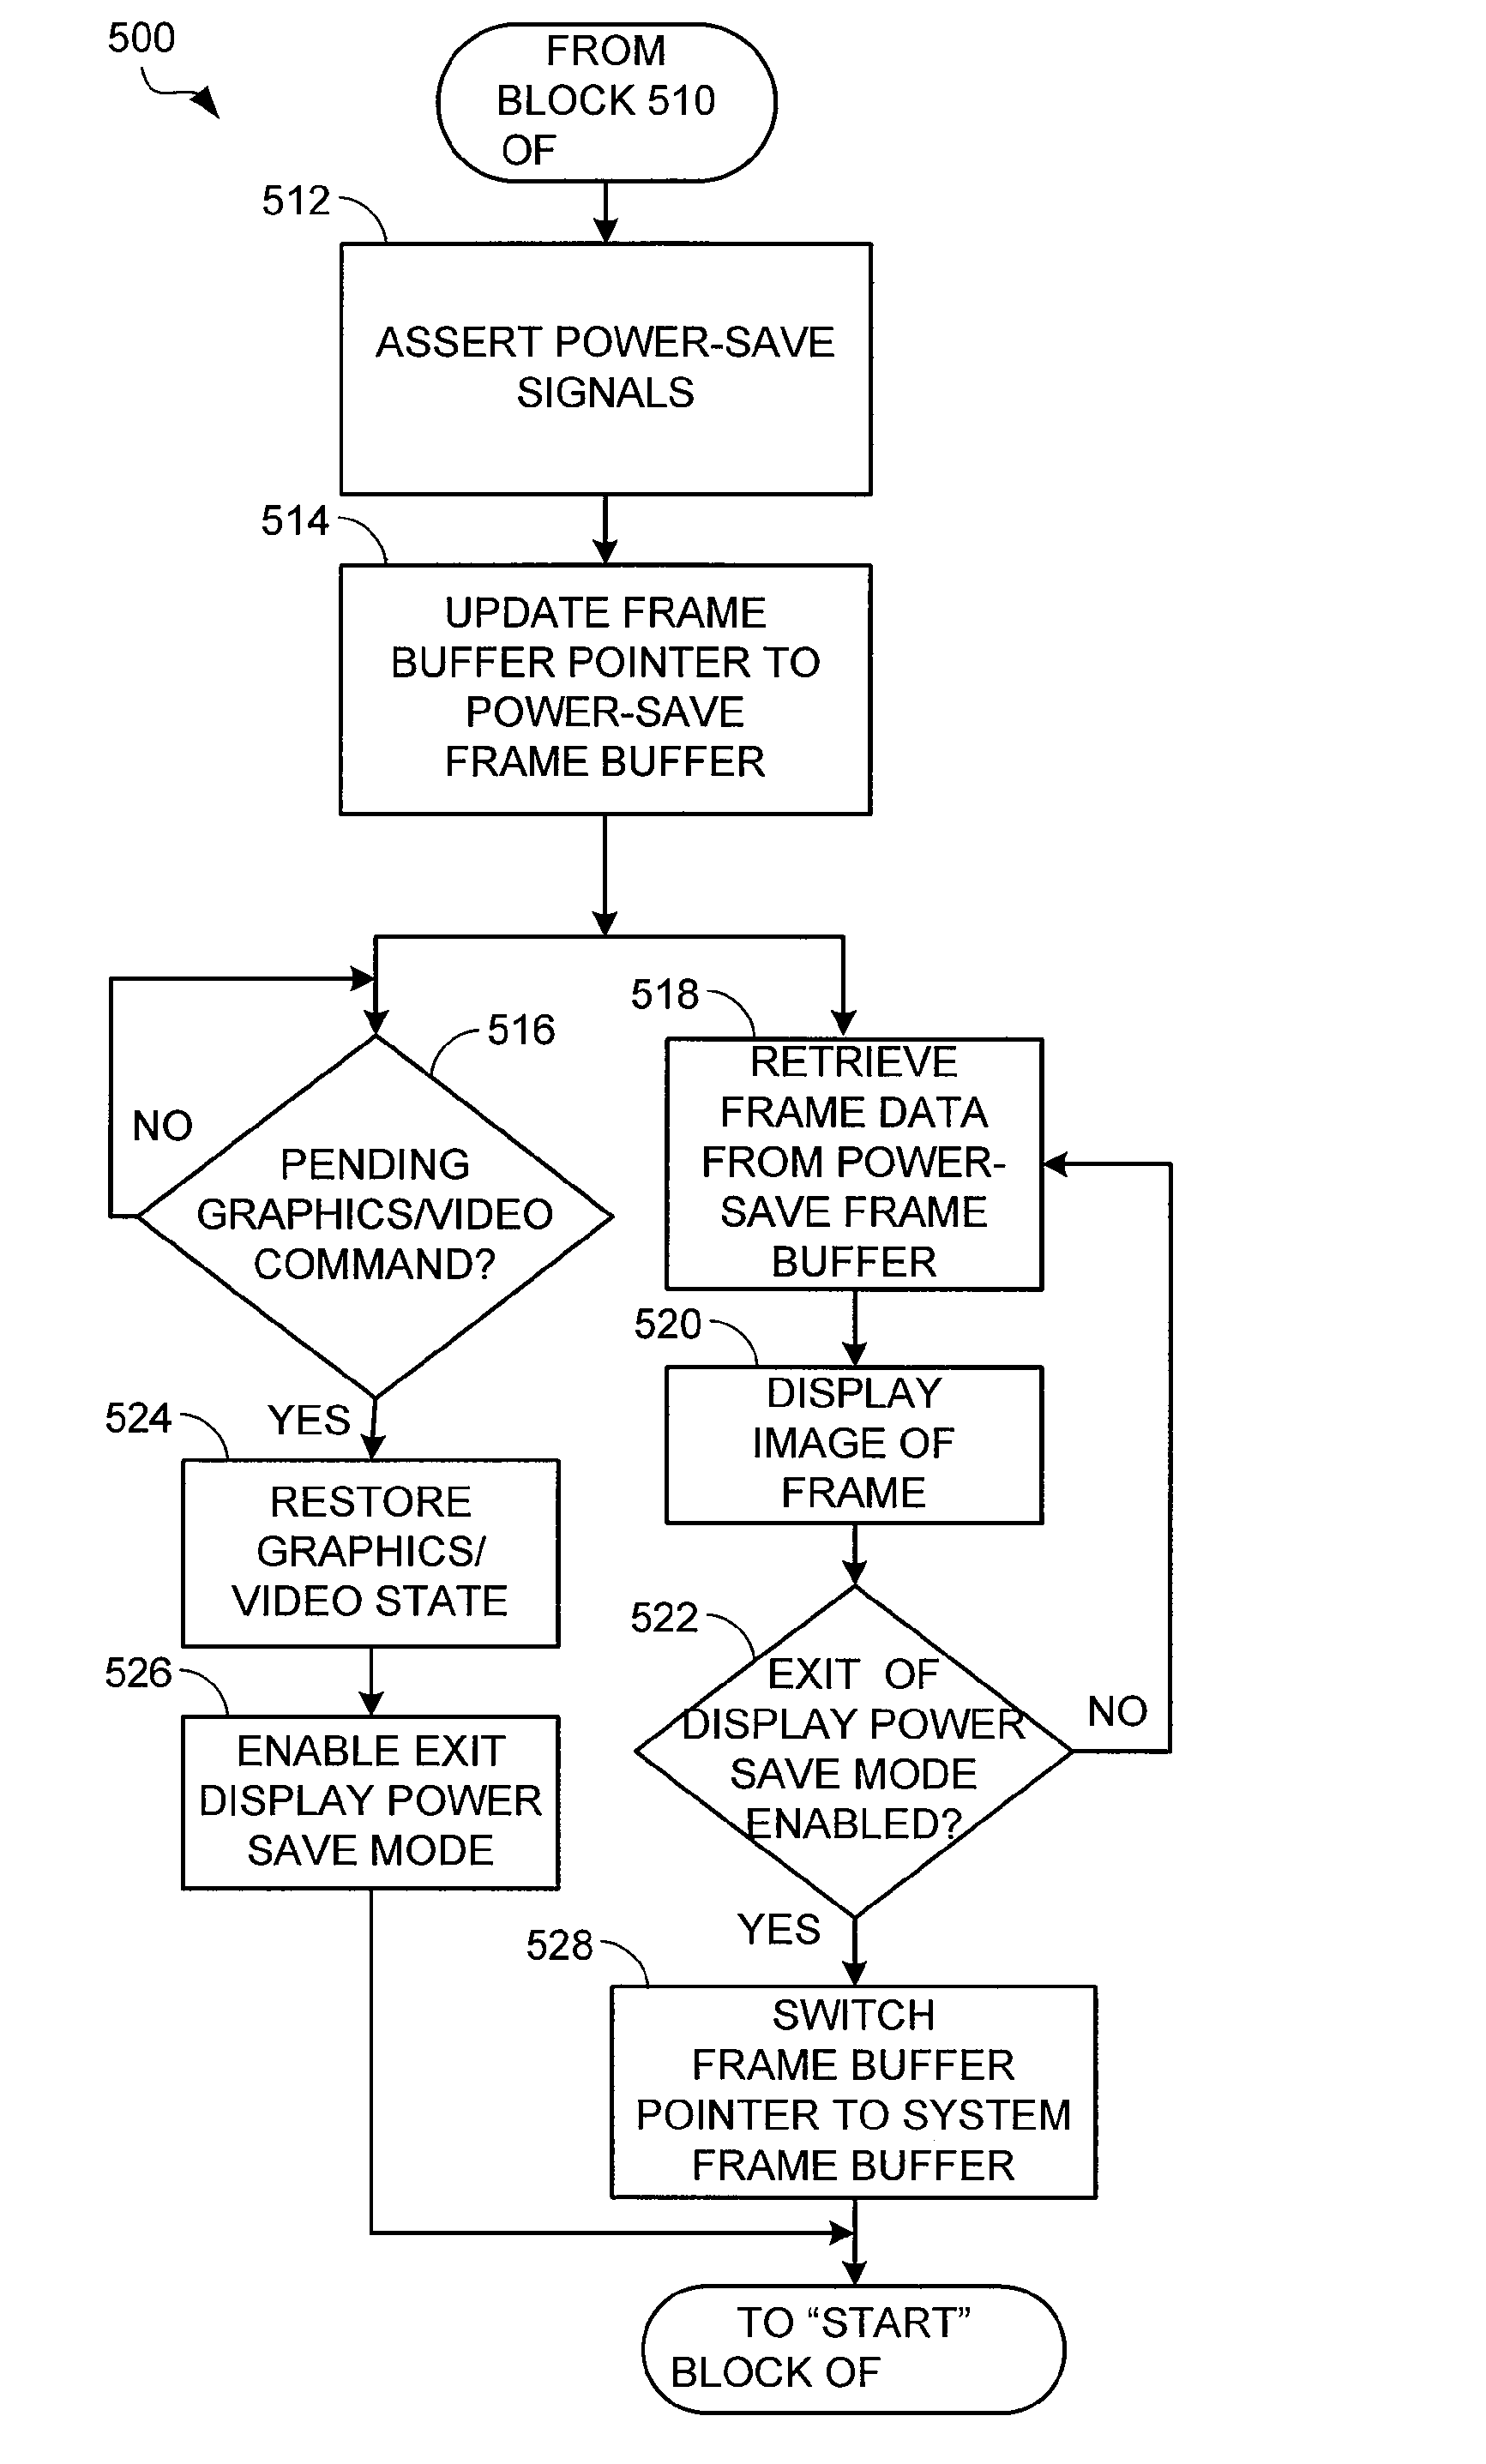 Systems and Methods for Low-Power Computer Operation